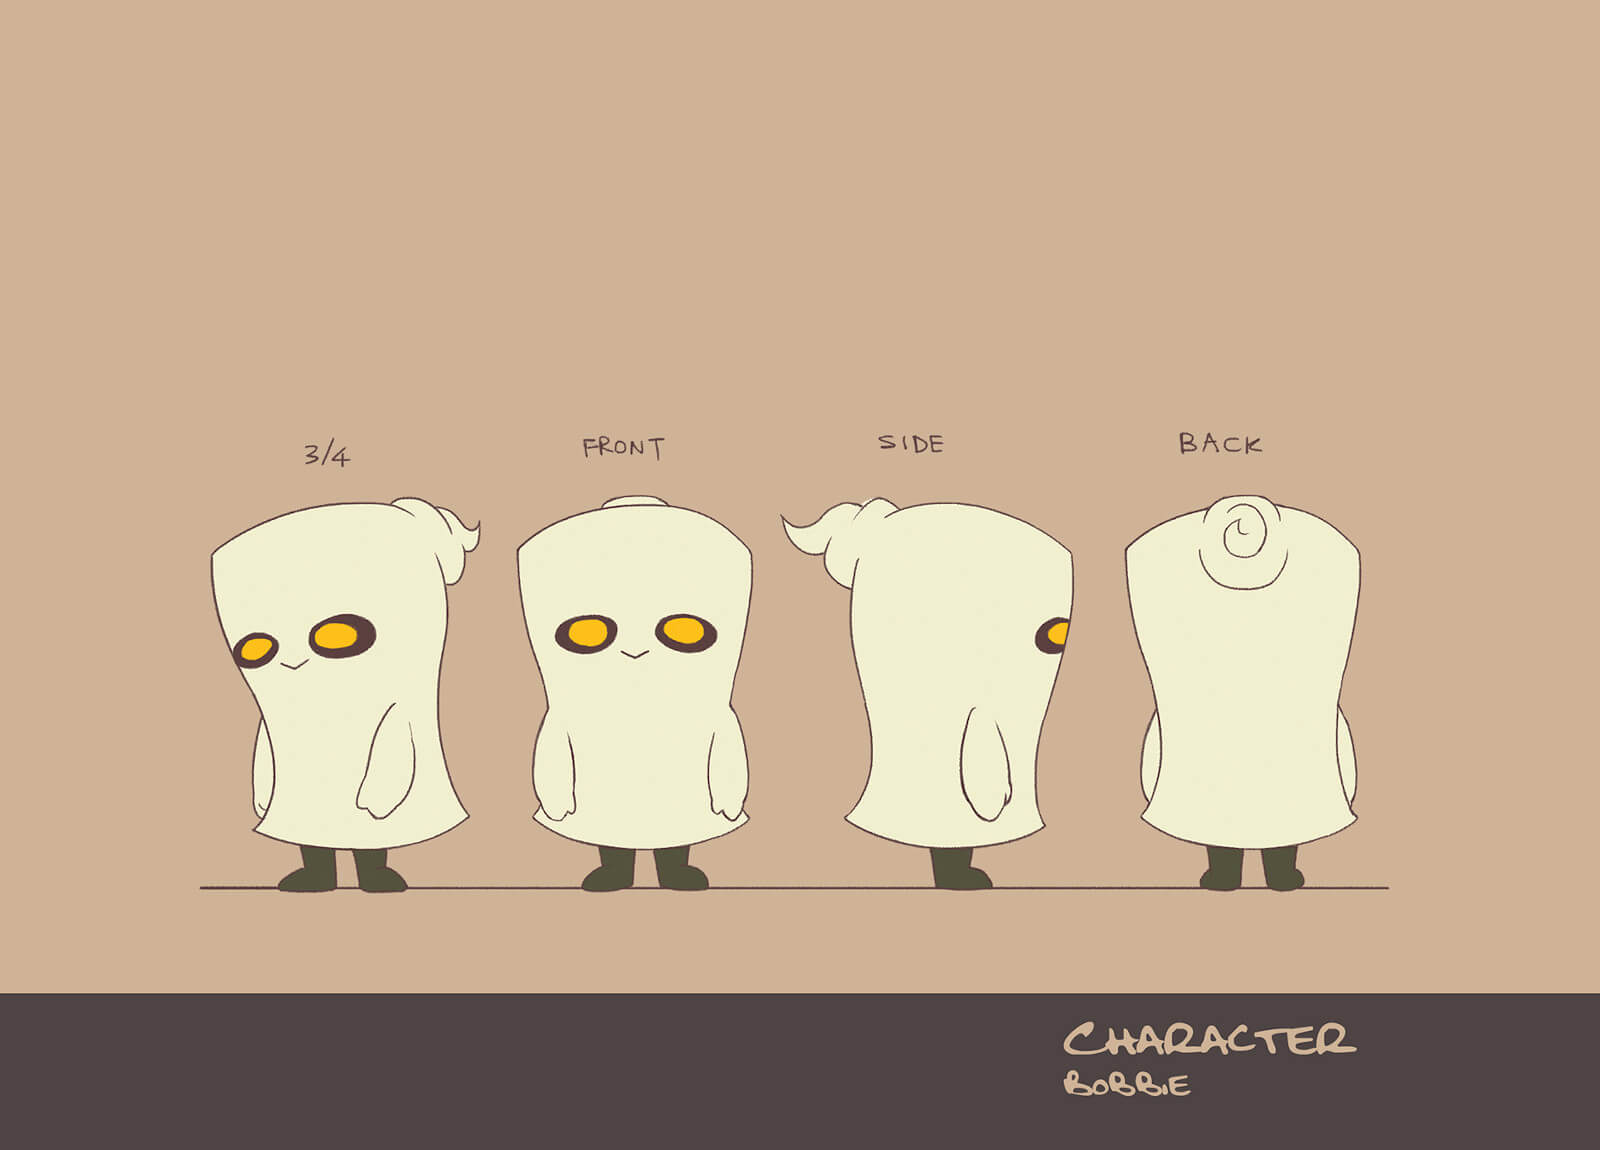 Character art for Bobbie the ghost child